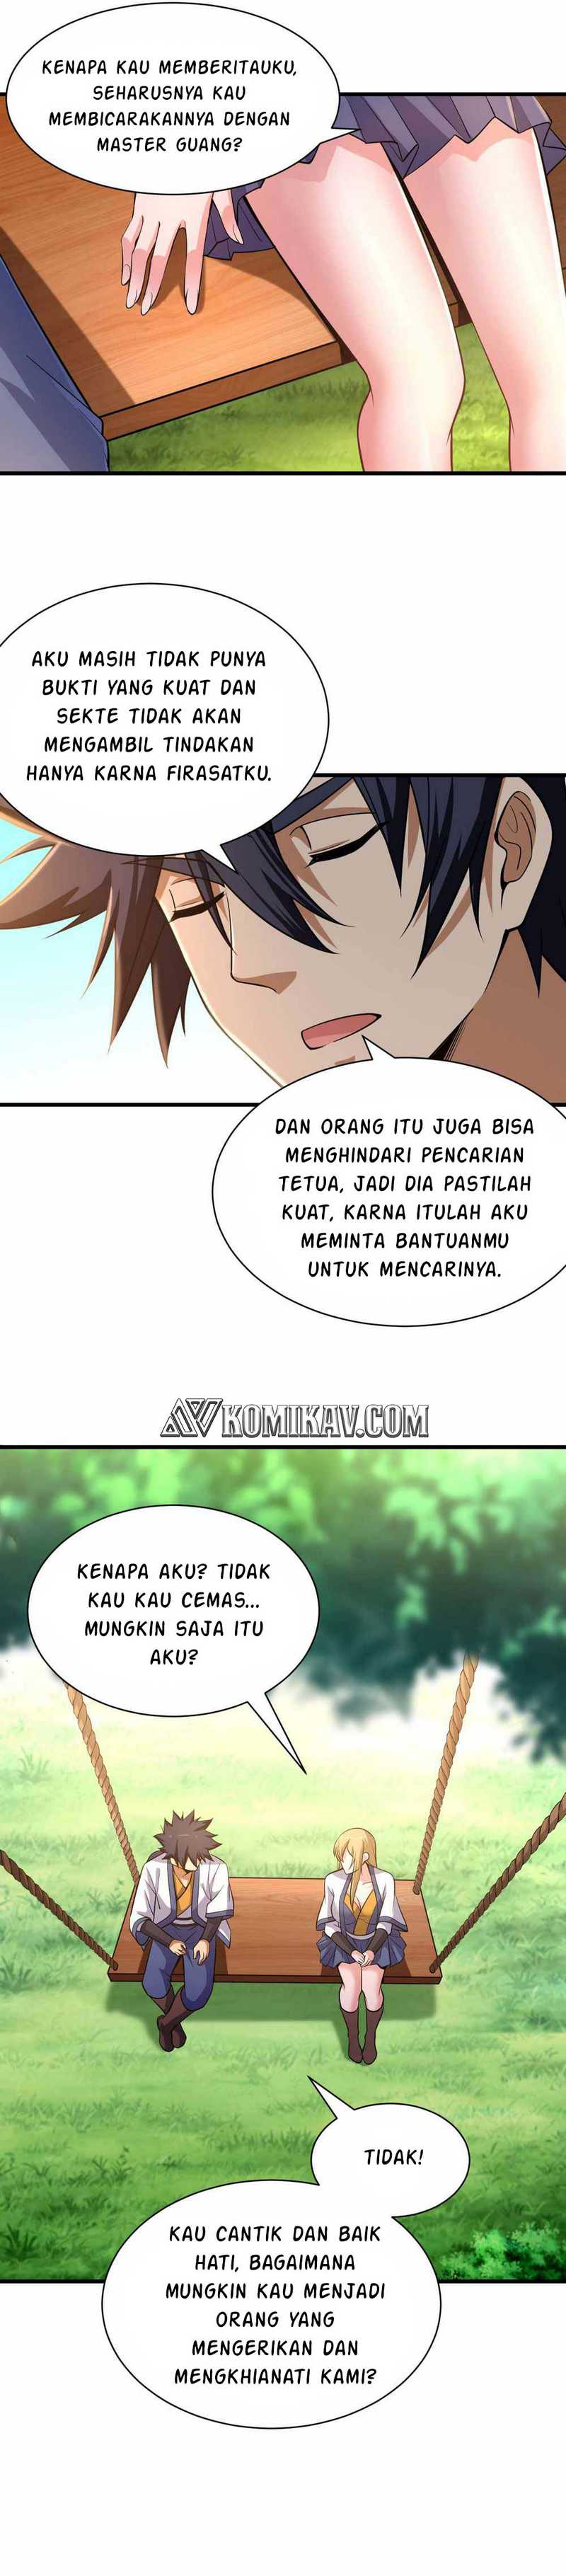 Dilarang COPAS - situs resmi www.mangacanblog.com - Komik i just want to be beaten to death by everyone 053 - chapter 53 54 Indonesia i just want to be beaten to death by everyone 053 - chapter 53 Terbaru 8|Baca Manga Komik Indonesia|Mangacan